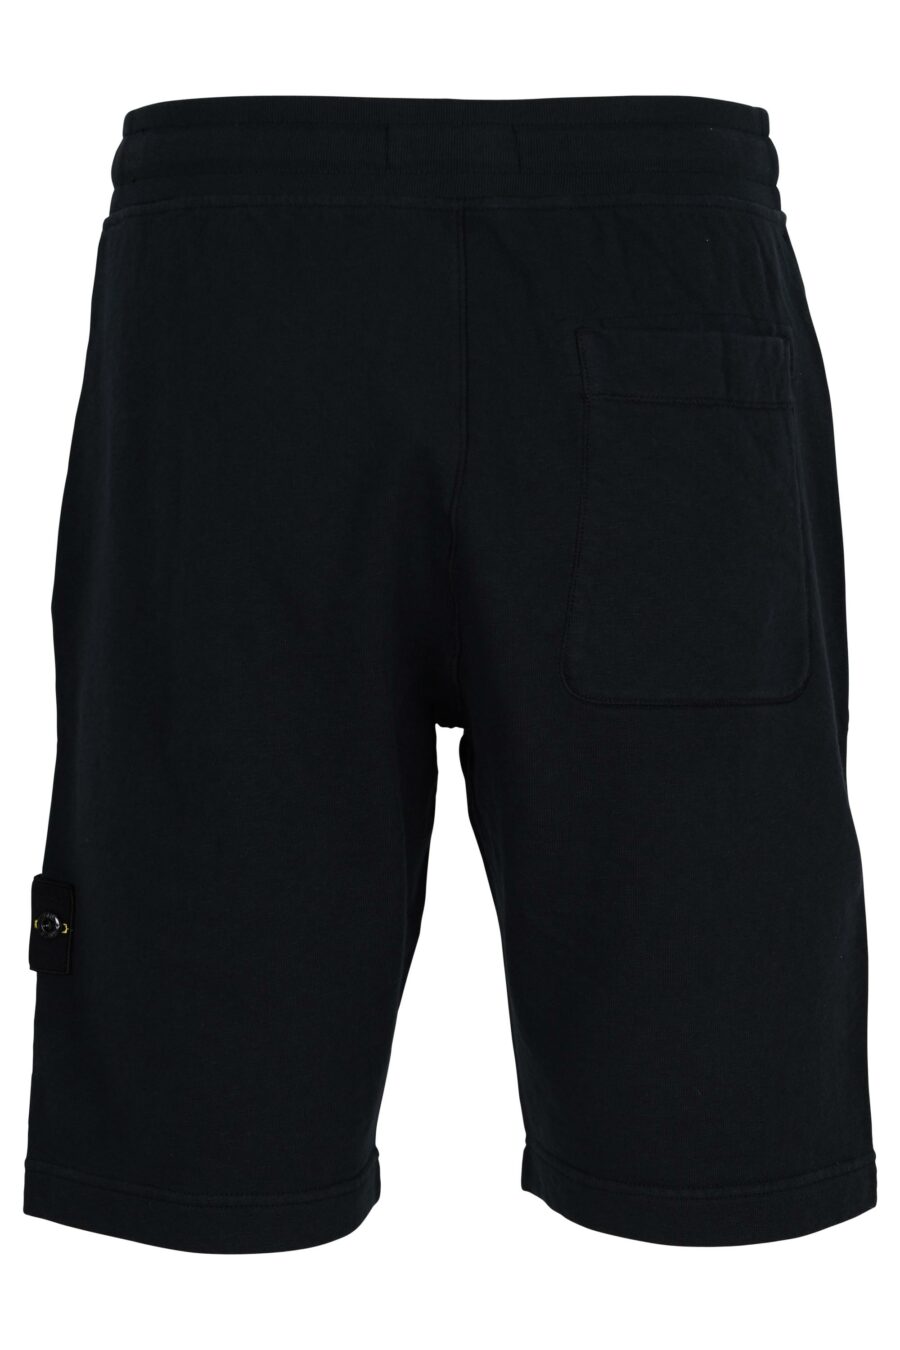 Tracksuit bottoms dark blue with logo compass patch - 8052572905575 1